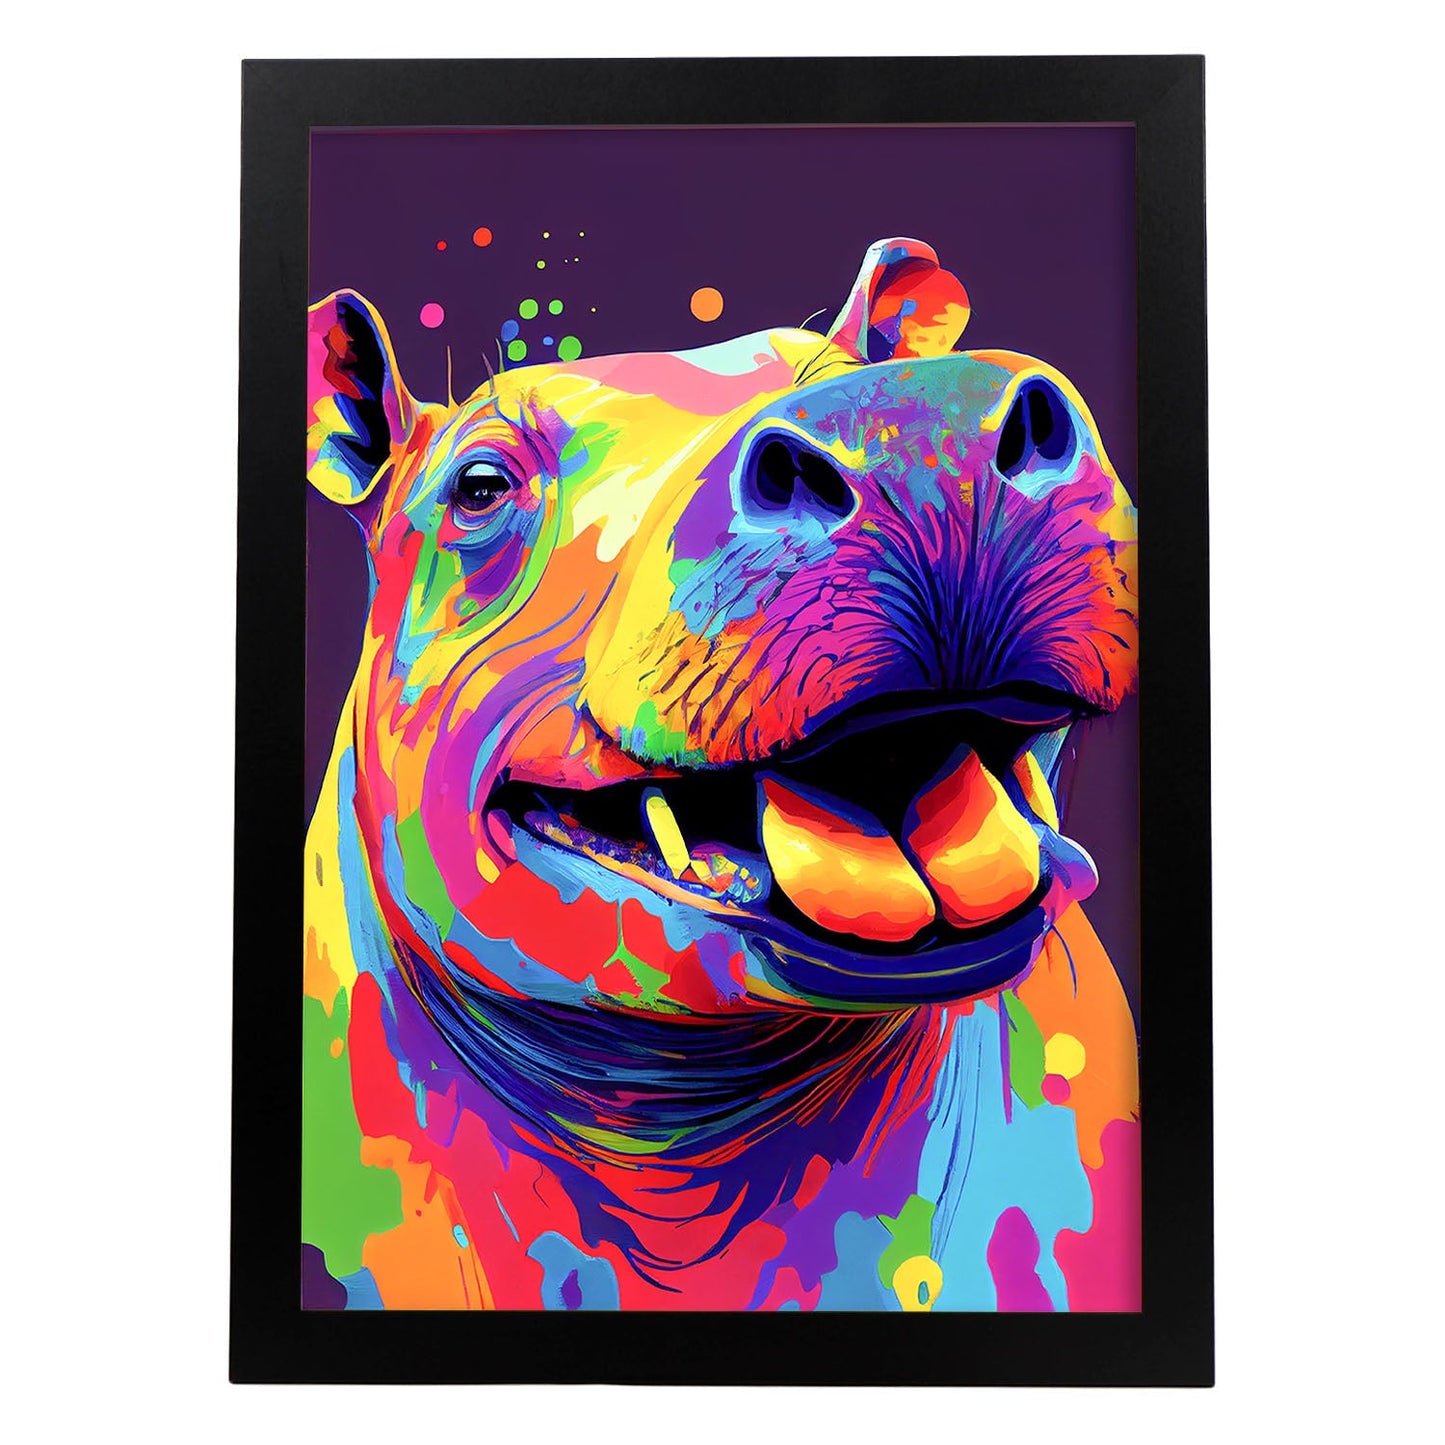 Nacnic Abstract smiling Hippopotamus in Lisa Fran Style_2. Aesthetic Wall Art Prints for Bedroom or Living Room Design.